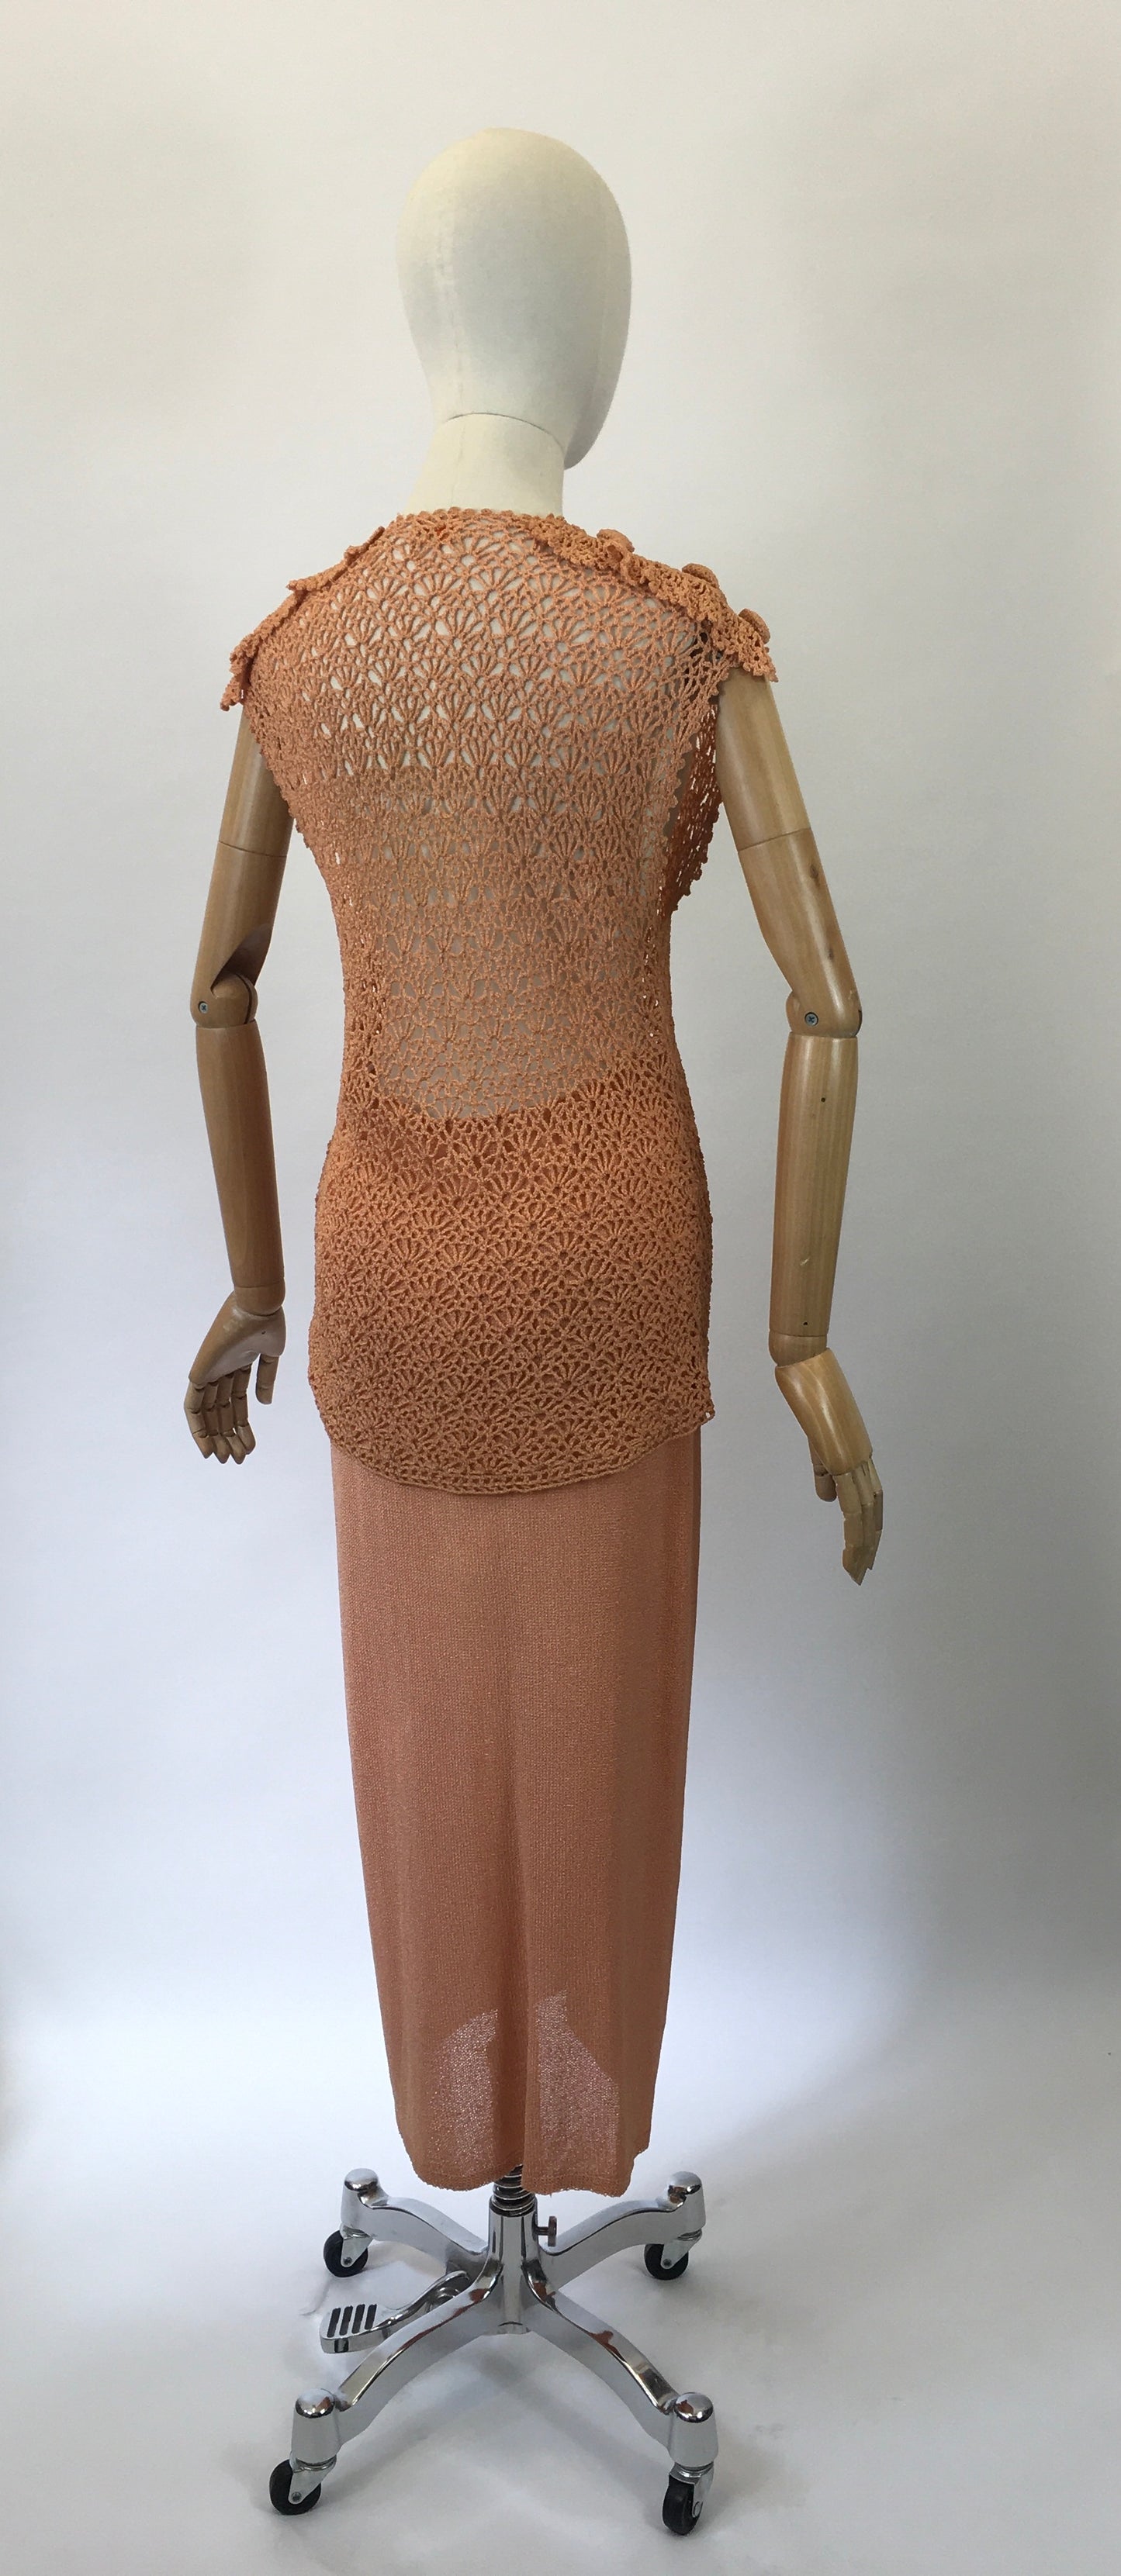 Original 1930s 2pc knit set - in beautiful coral colourway